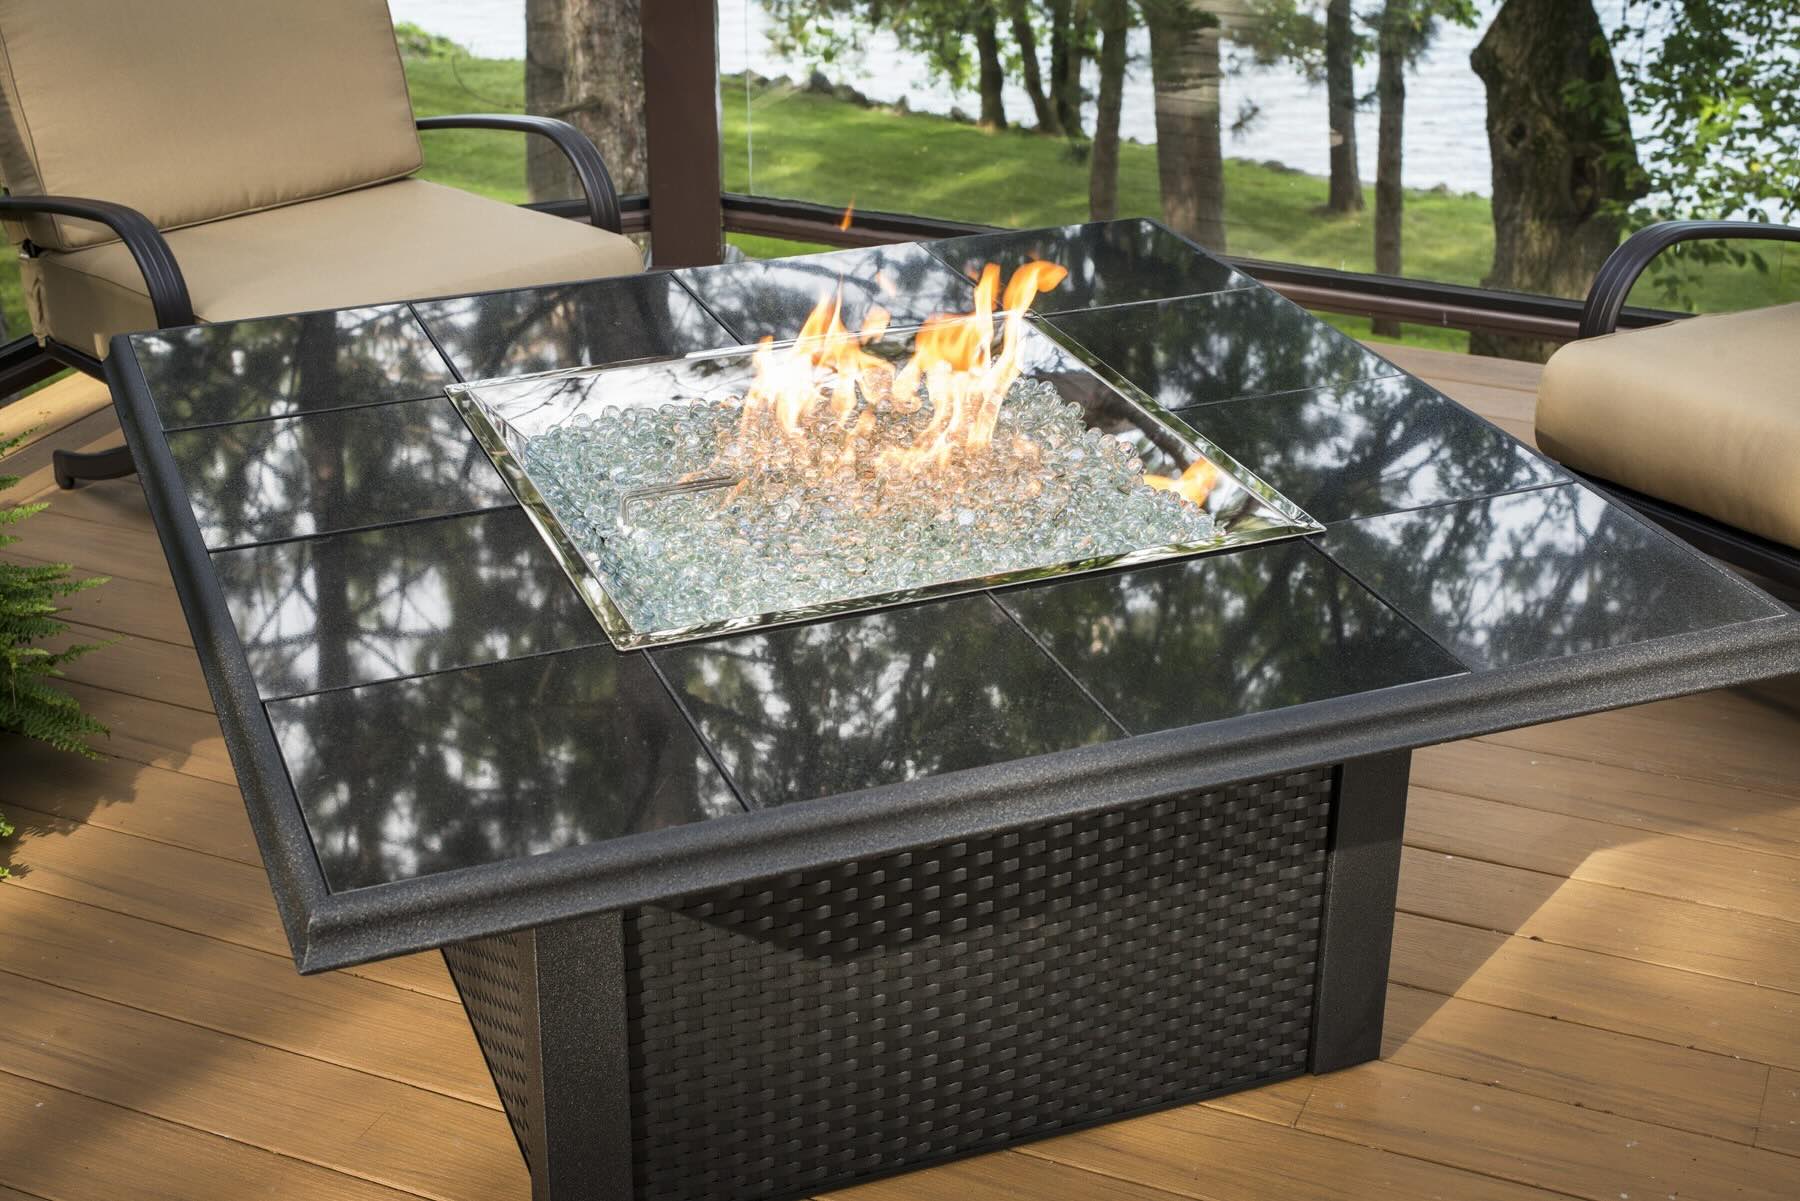 How To Start An Electric Fire Pit